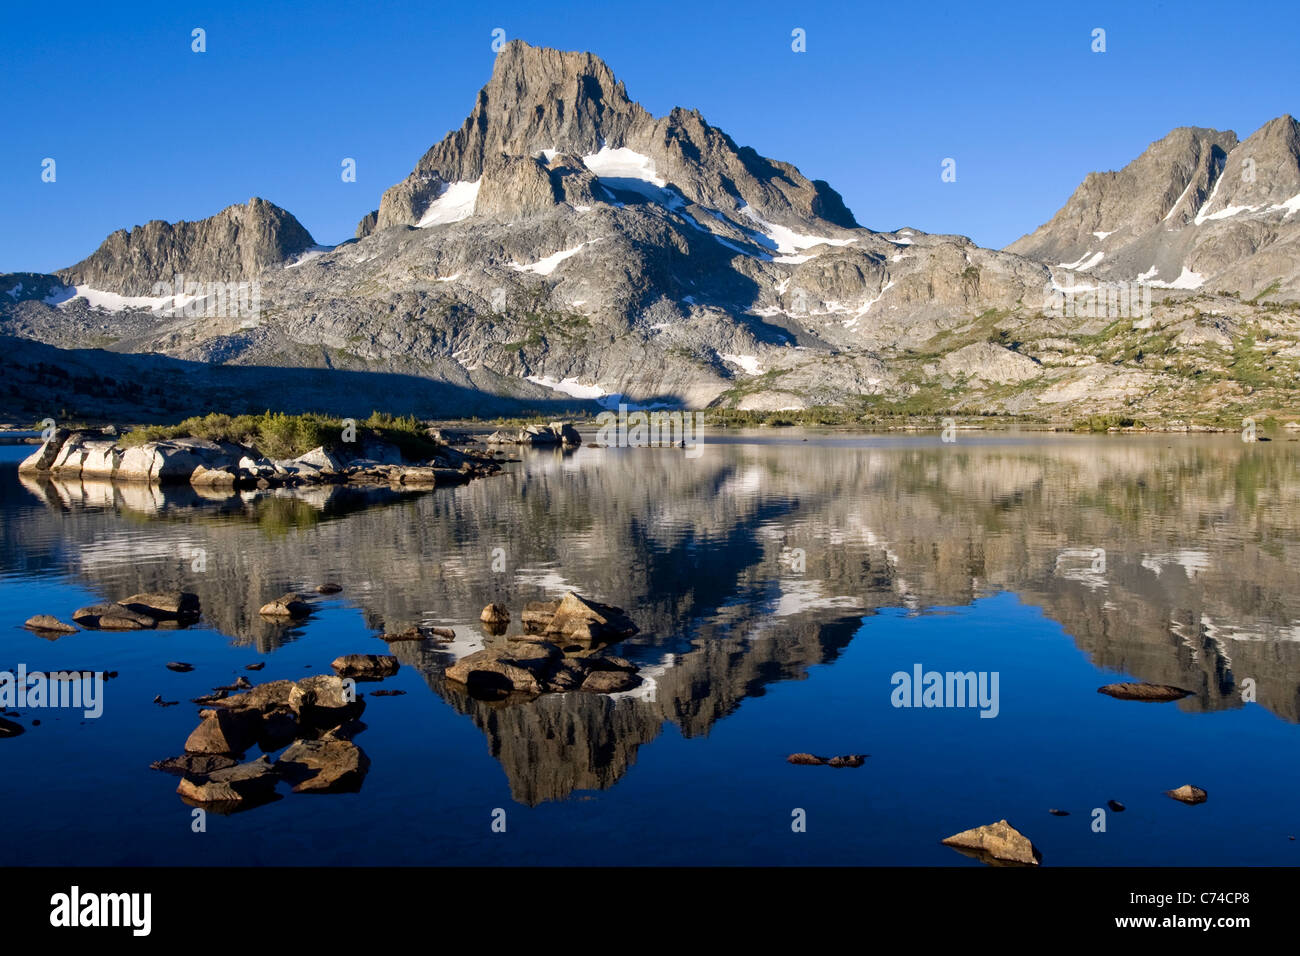 Reflection of a snow covered mountain in a High Sierra lake in California. Stock Photo